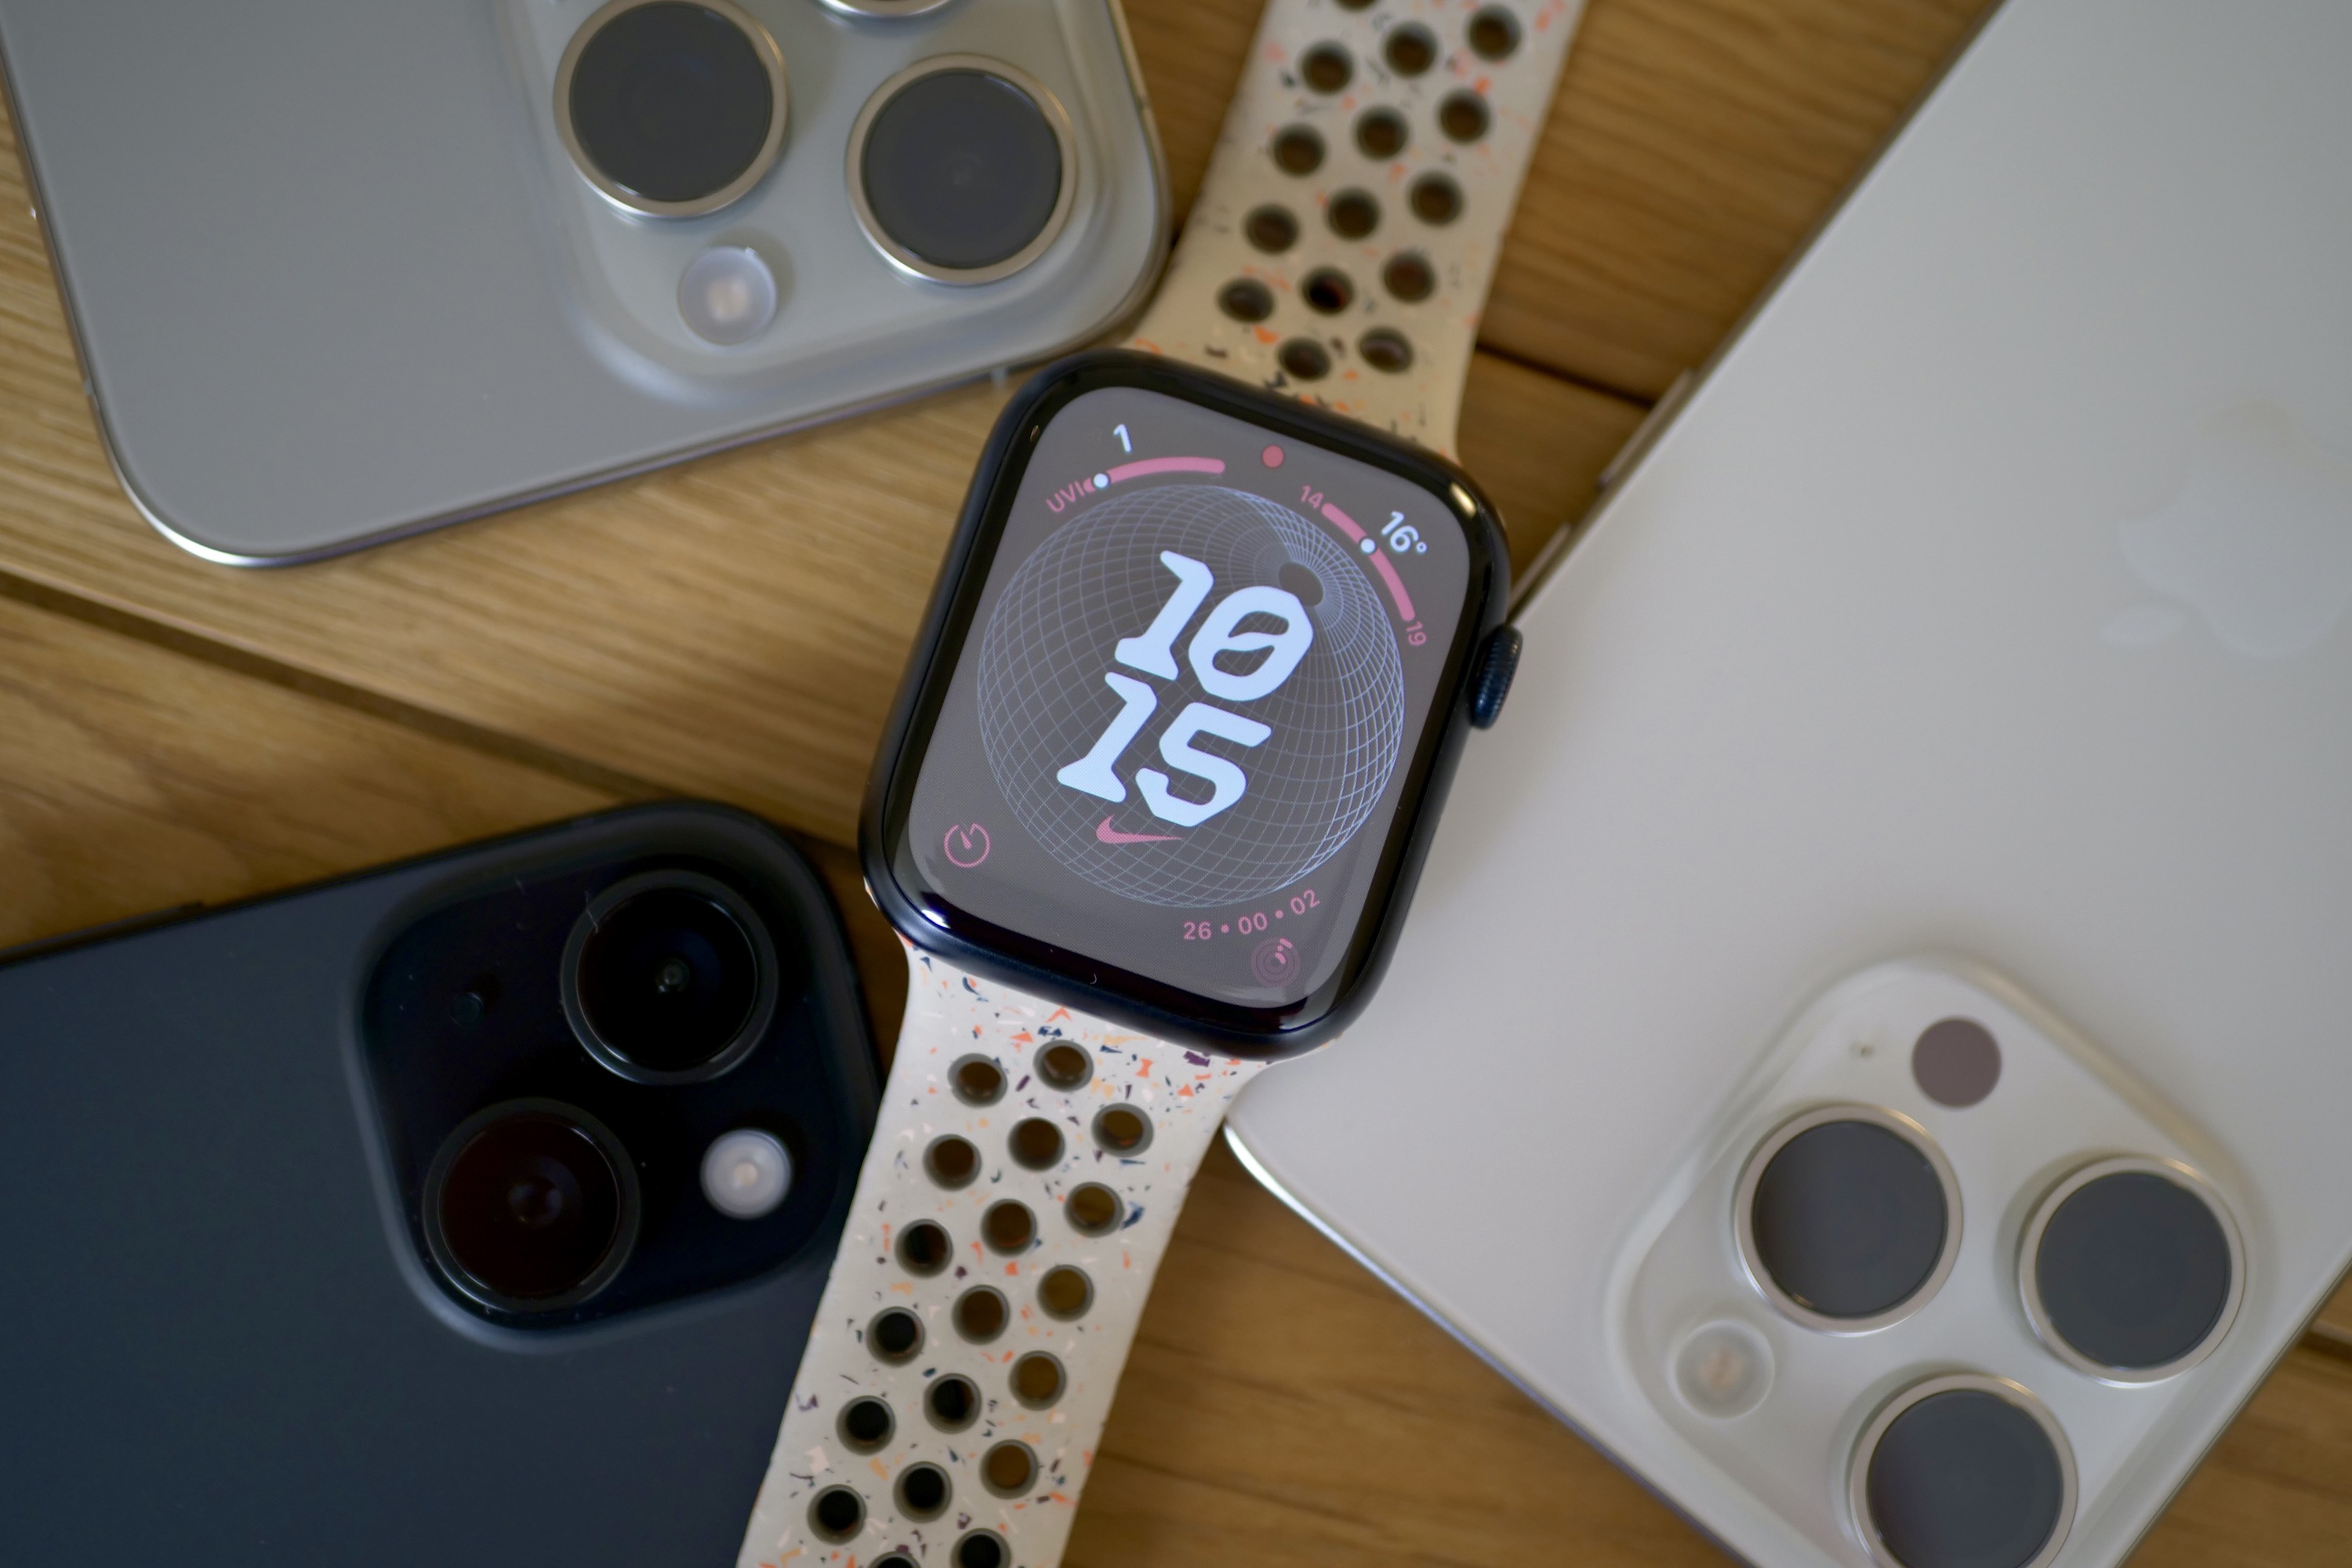 Sale 2023: Looking to upgrade your smartwatch? Get up to 91%  discount